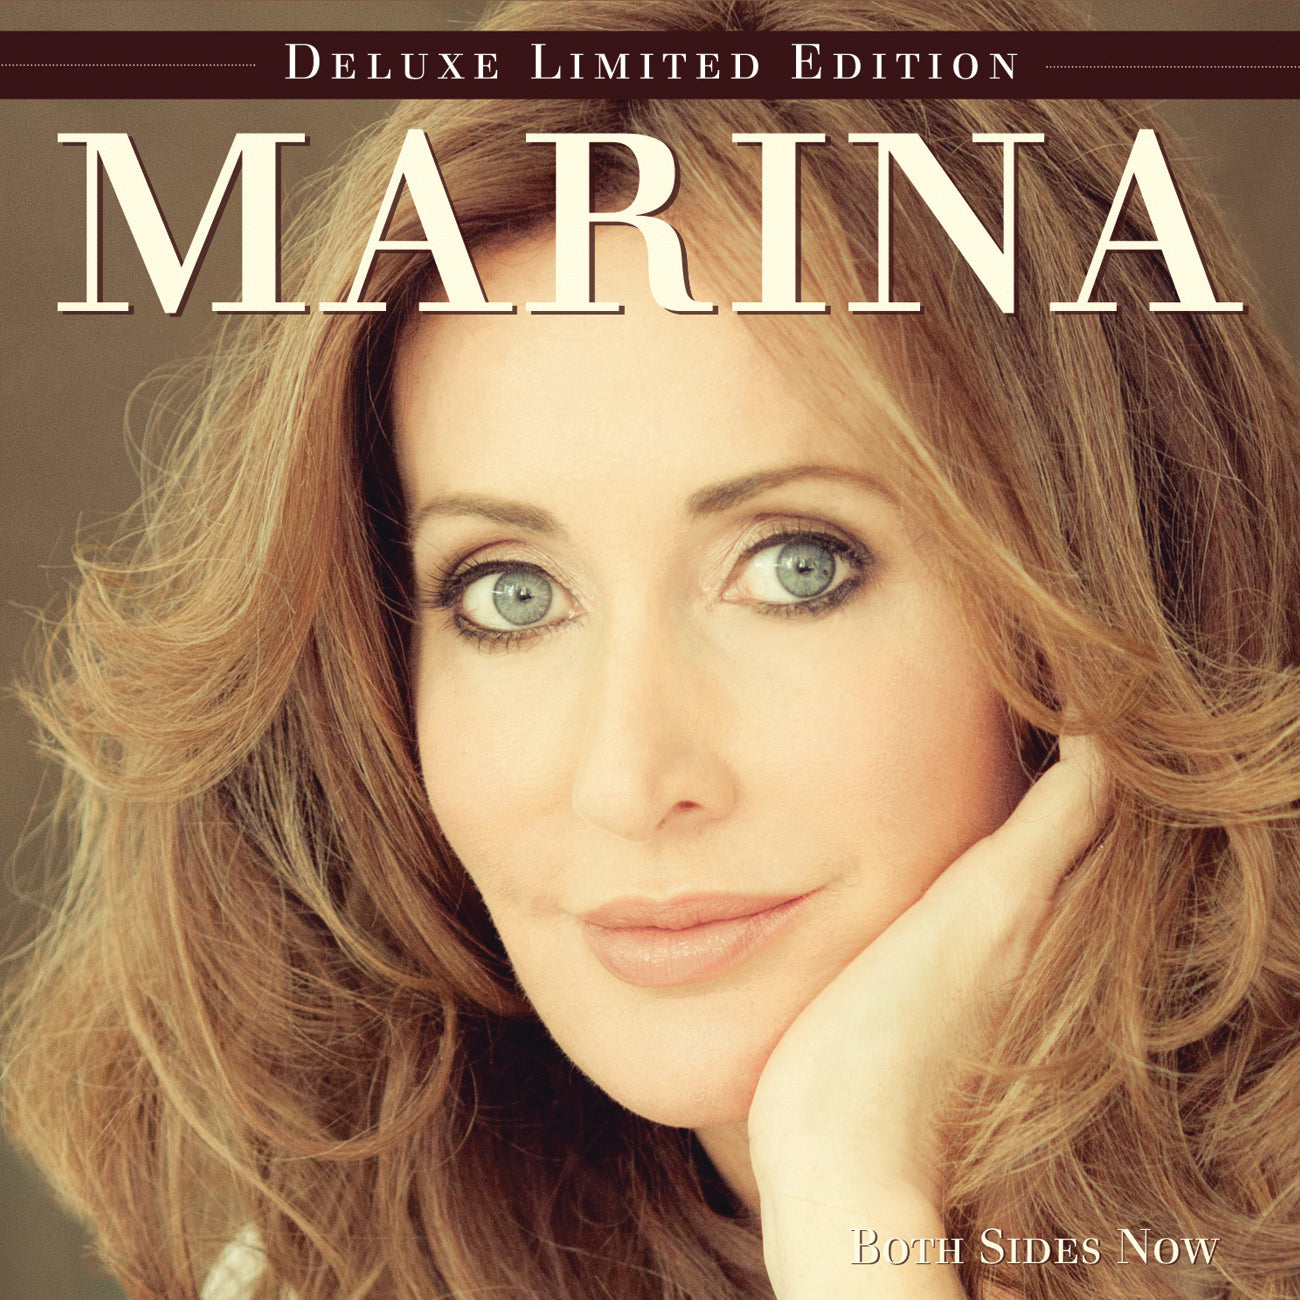 MARINA PRIOR - BOTH SIDES NOW (DELUXE EDITION)